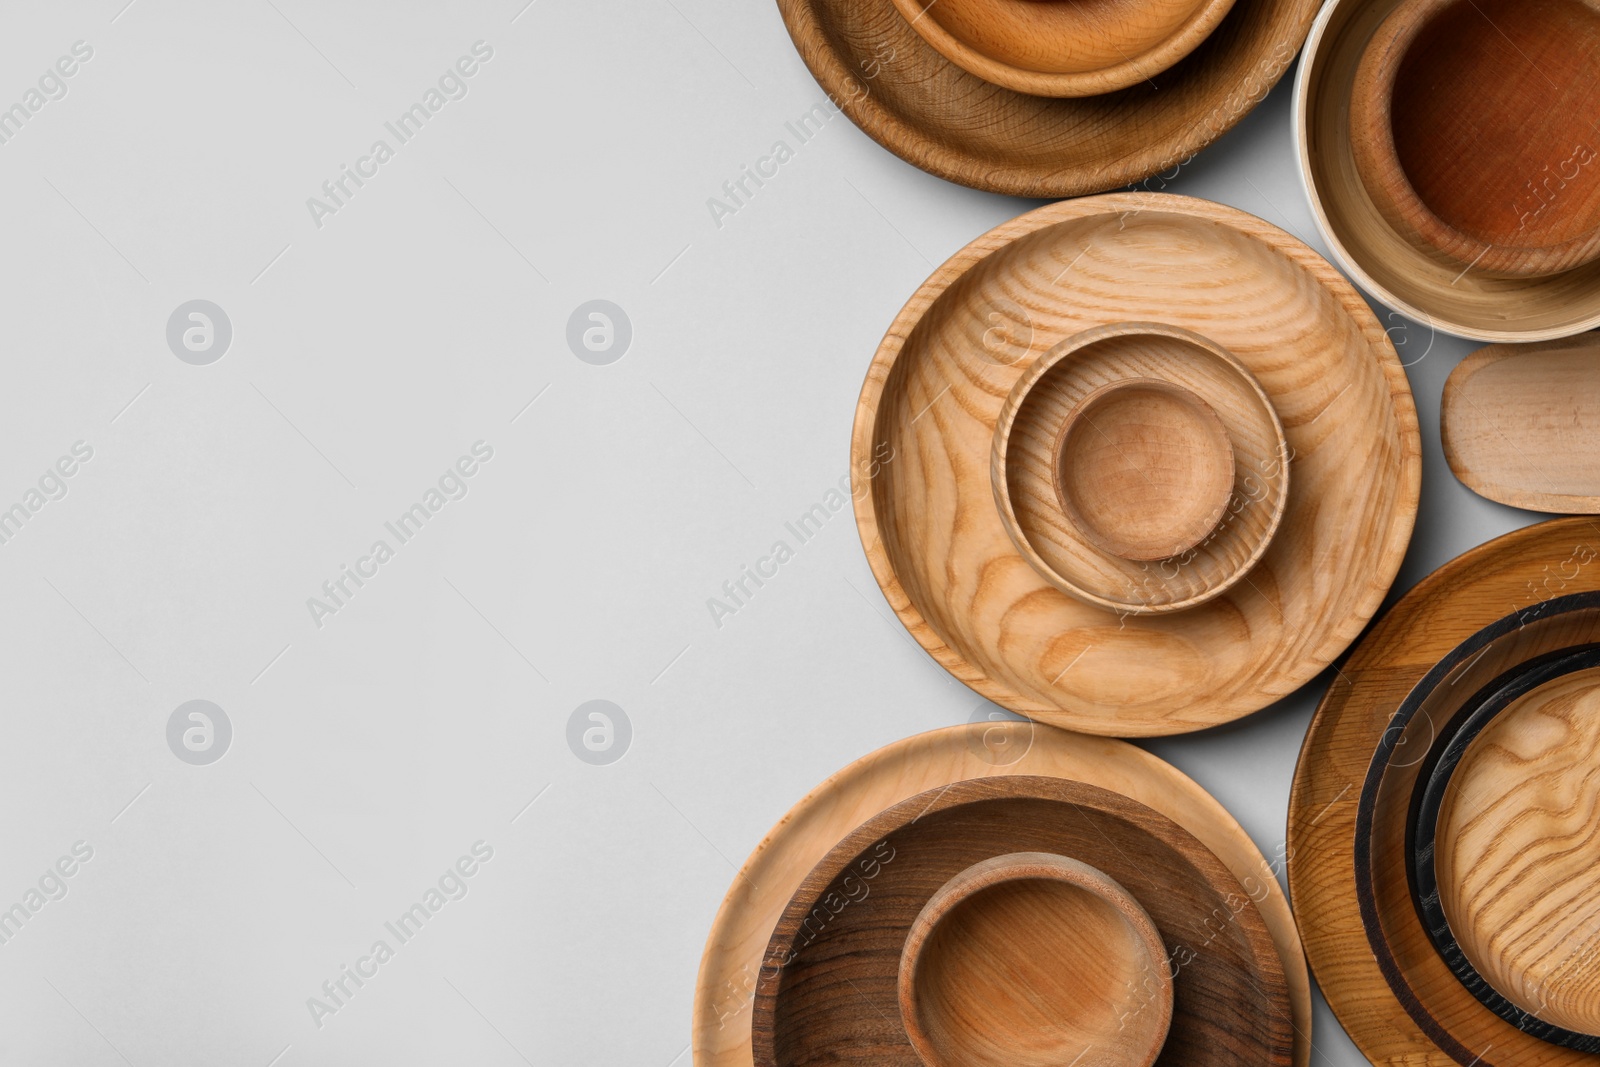 Photo of Set of different wooden dishes on light grey background, flat lay with space for text. Cooking utensils